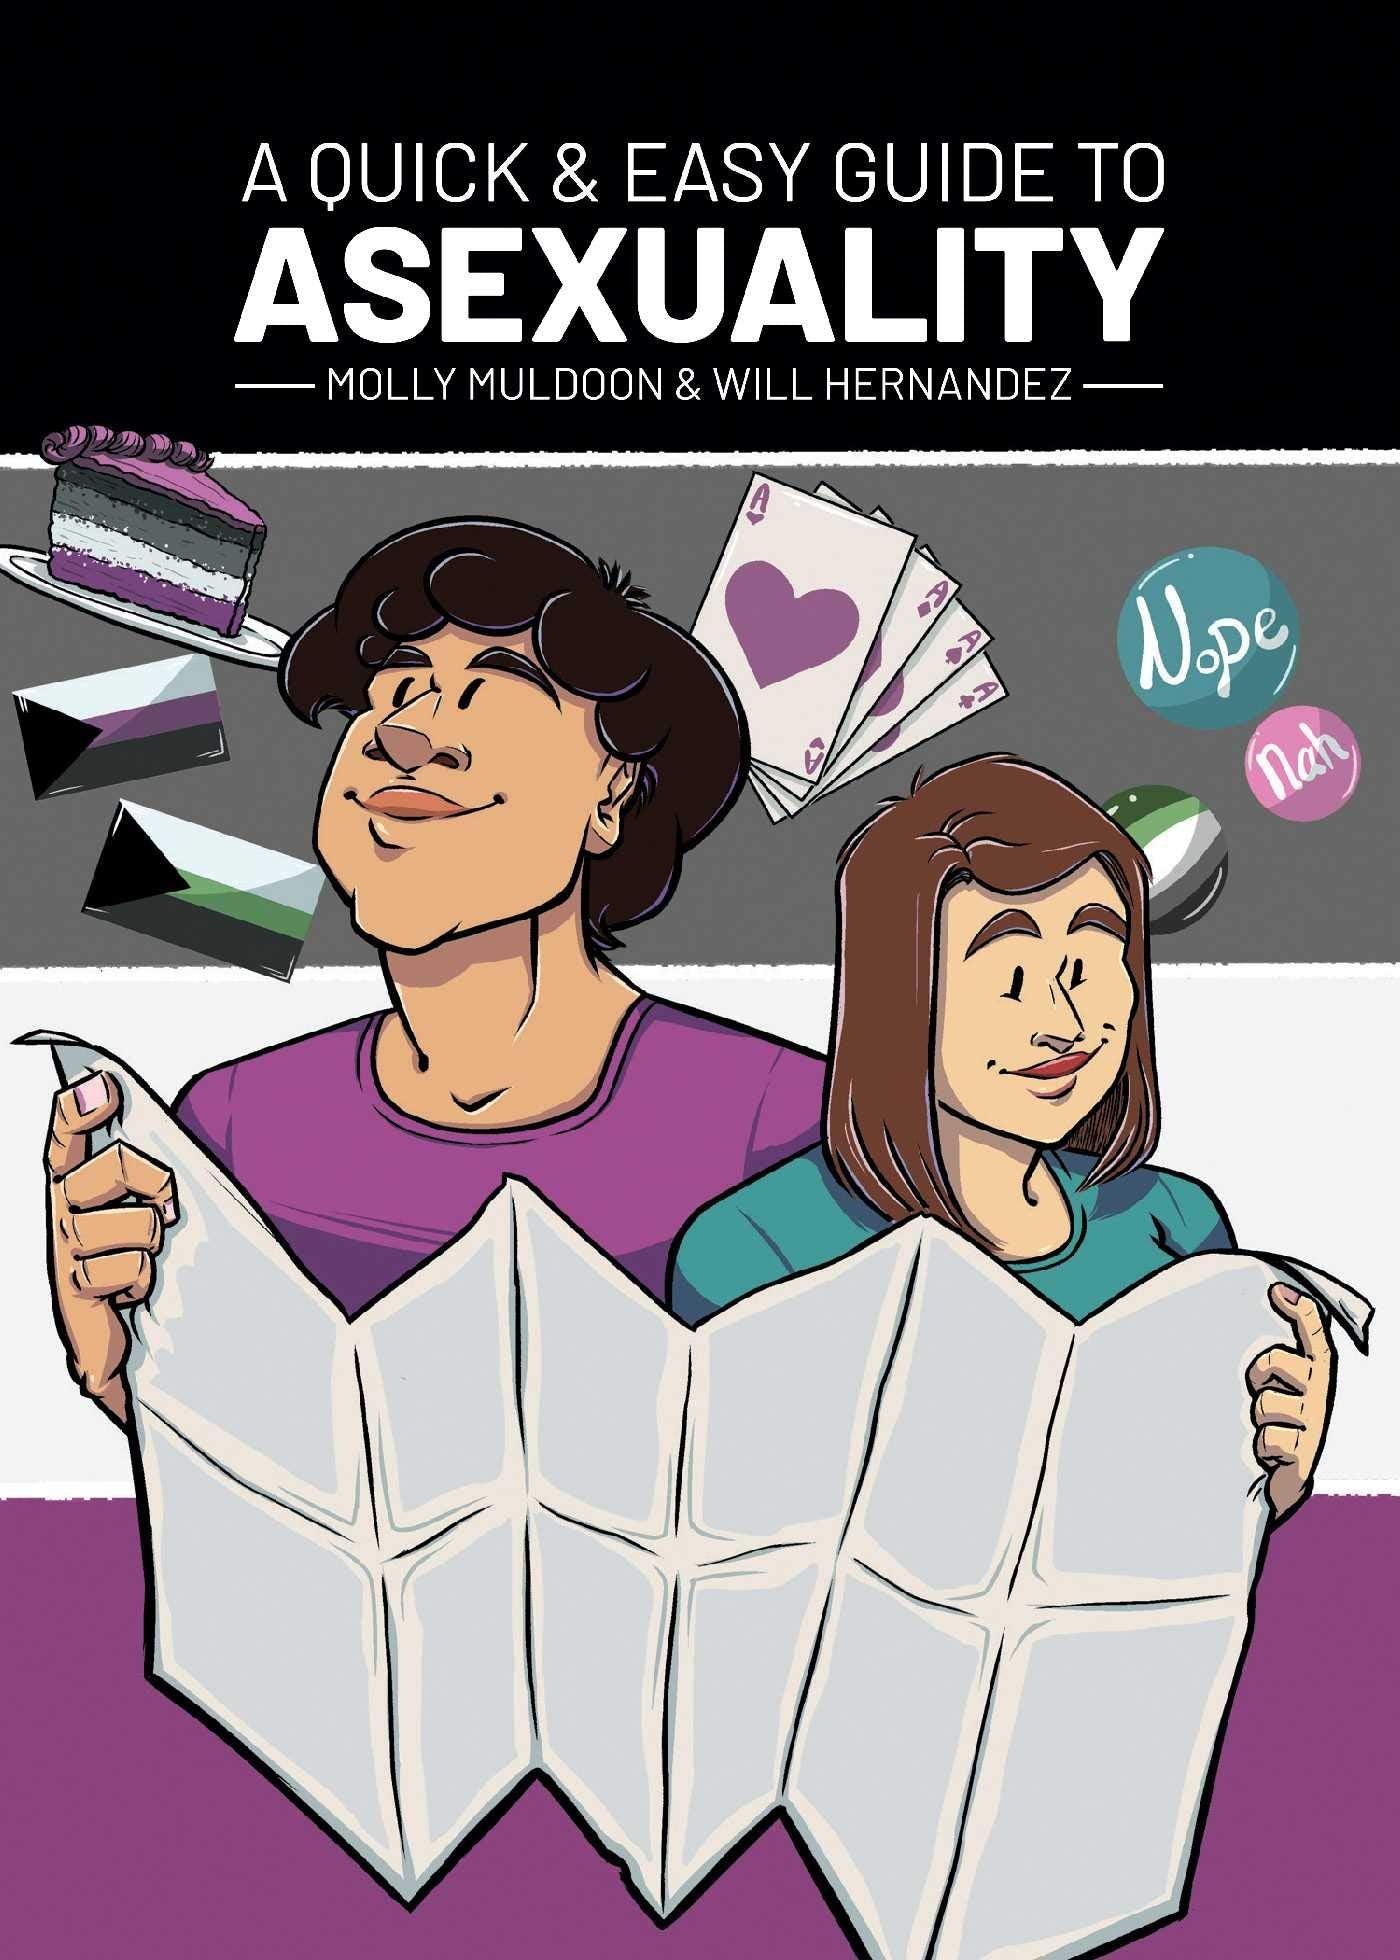 A Quick & Easy Guide to Asexuality - ShopQueer.co